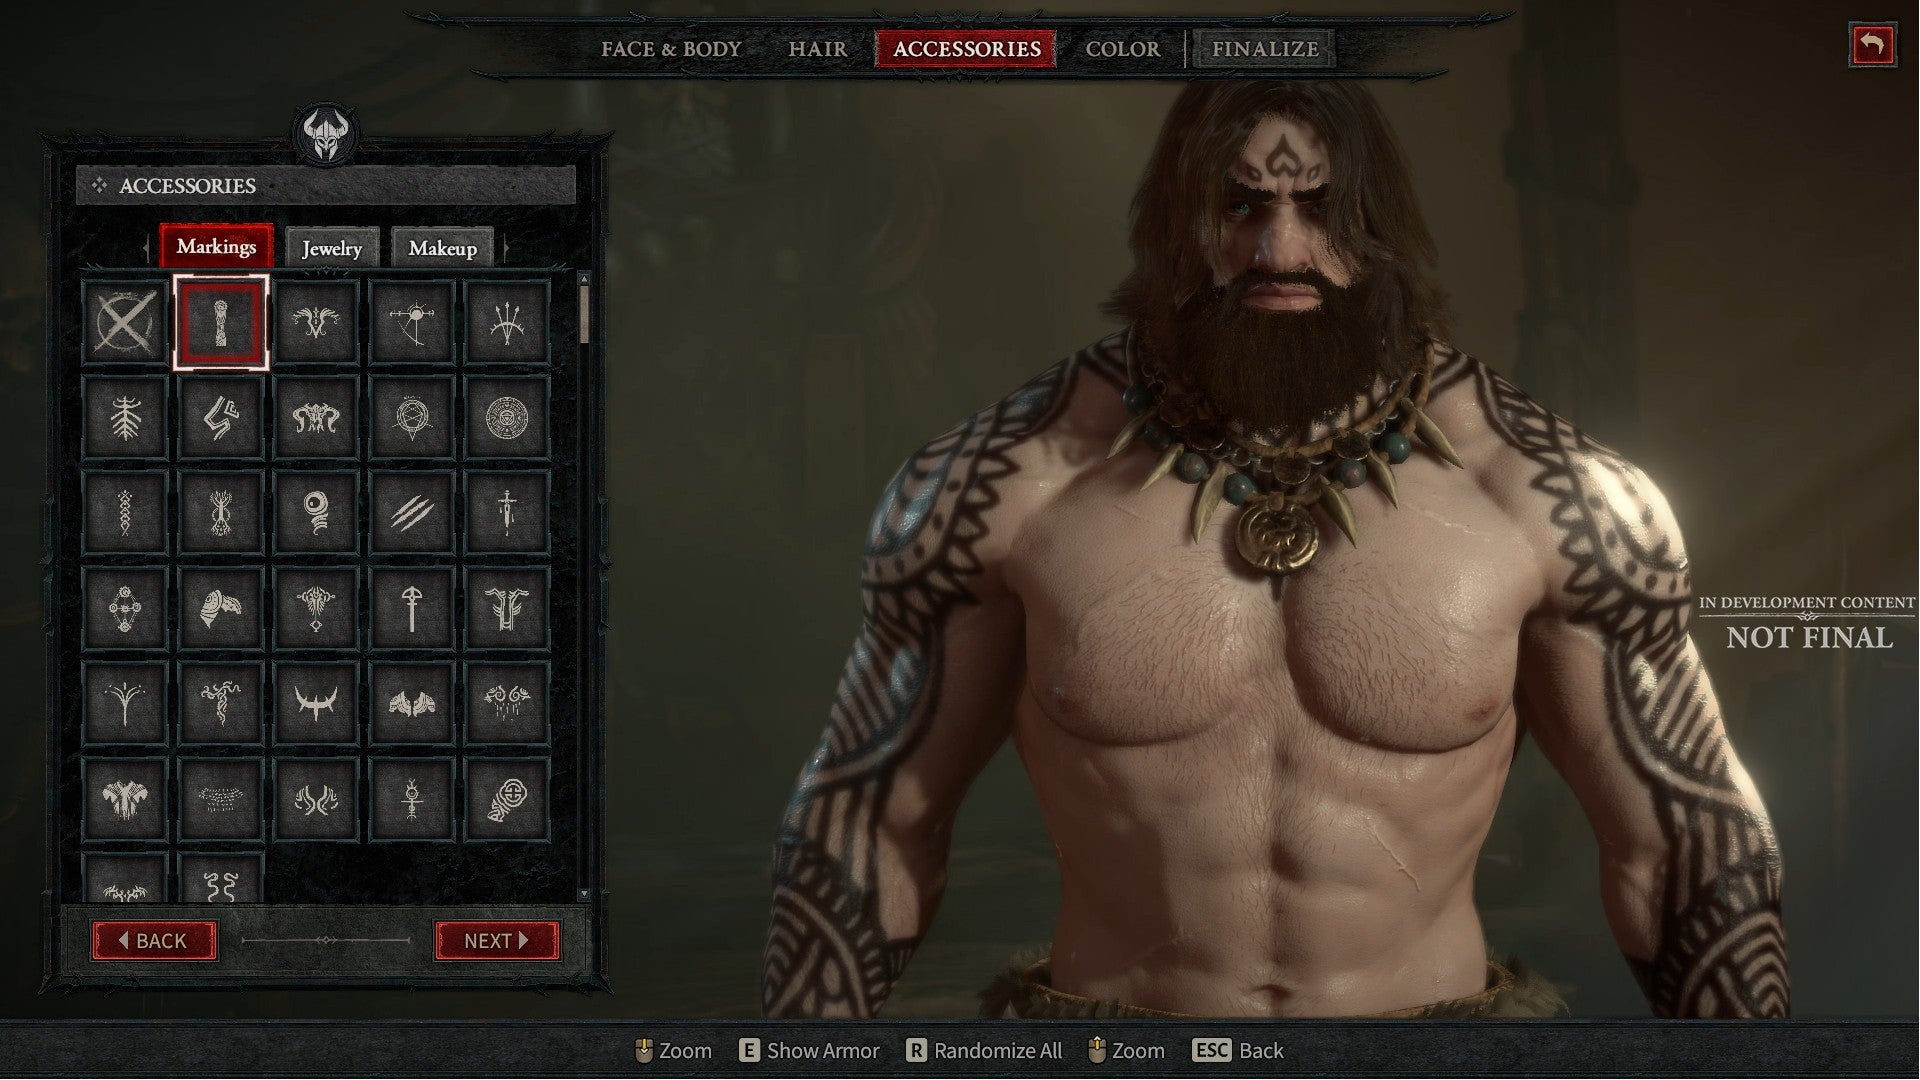 Diablo 4 image showing the Barbarian class in a customisation screen.